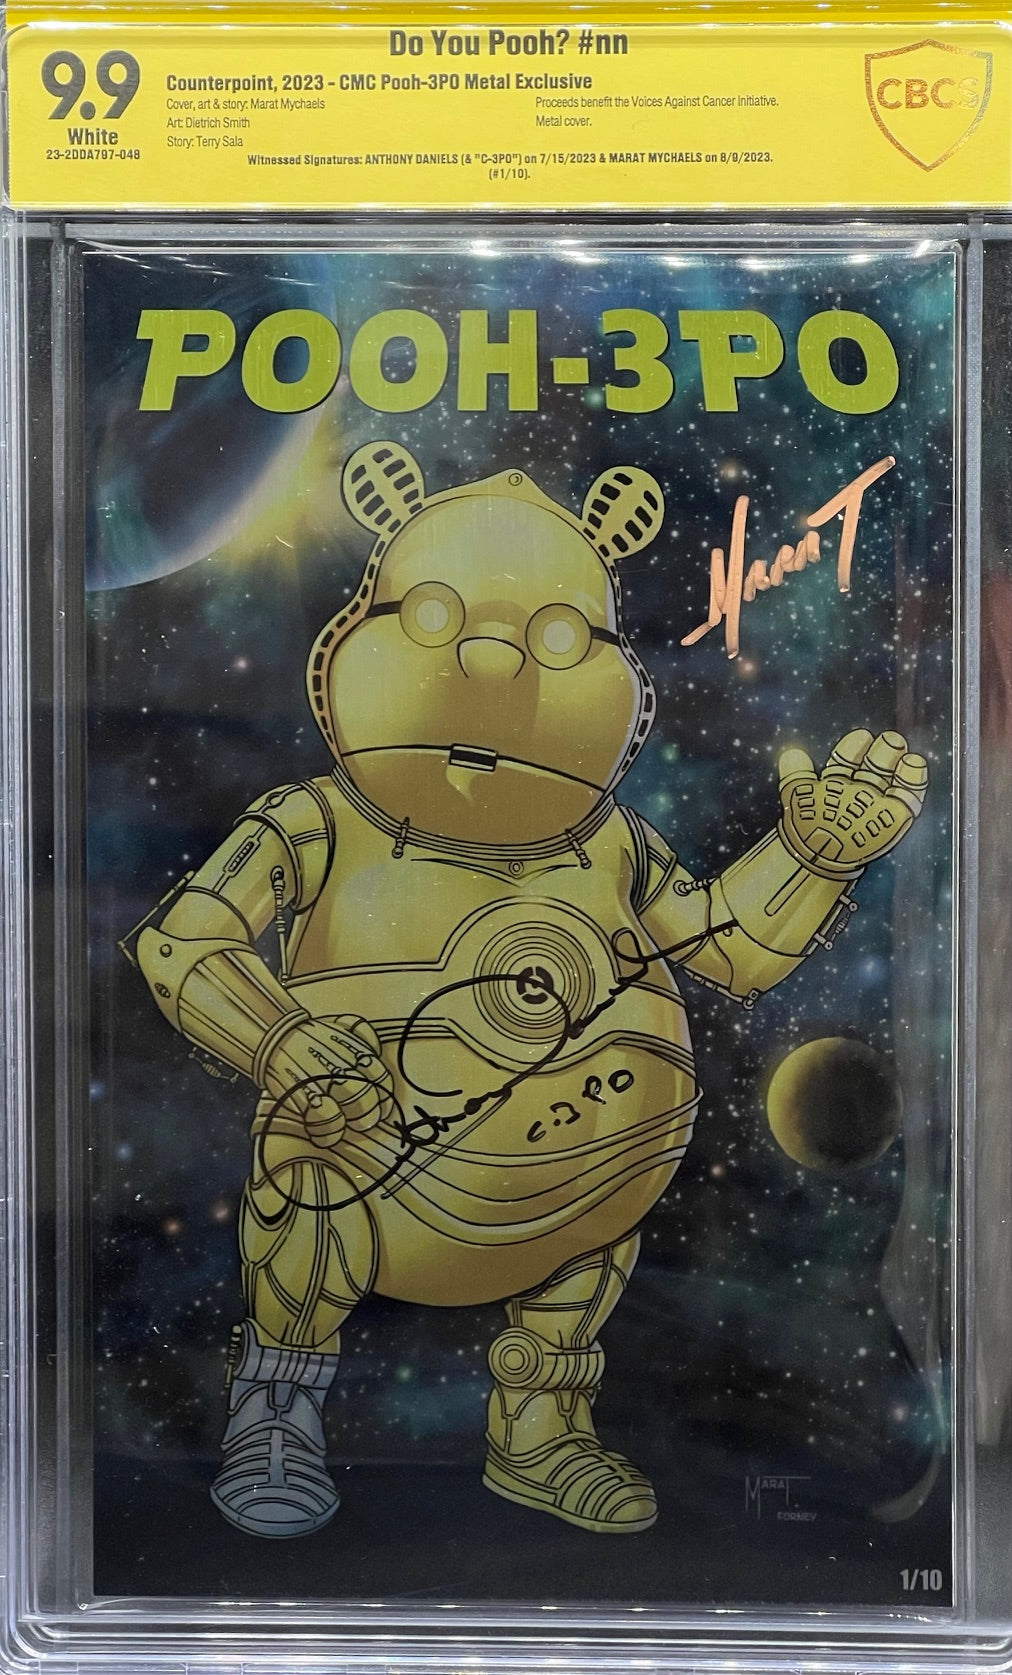 Do You Pooh? #nn CMC Pooh-3P0 Metal Exclusive (#1/10) CBCS 9.9 Yellow Label ~ DUAL SIGNED!